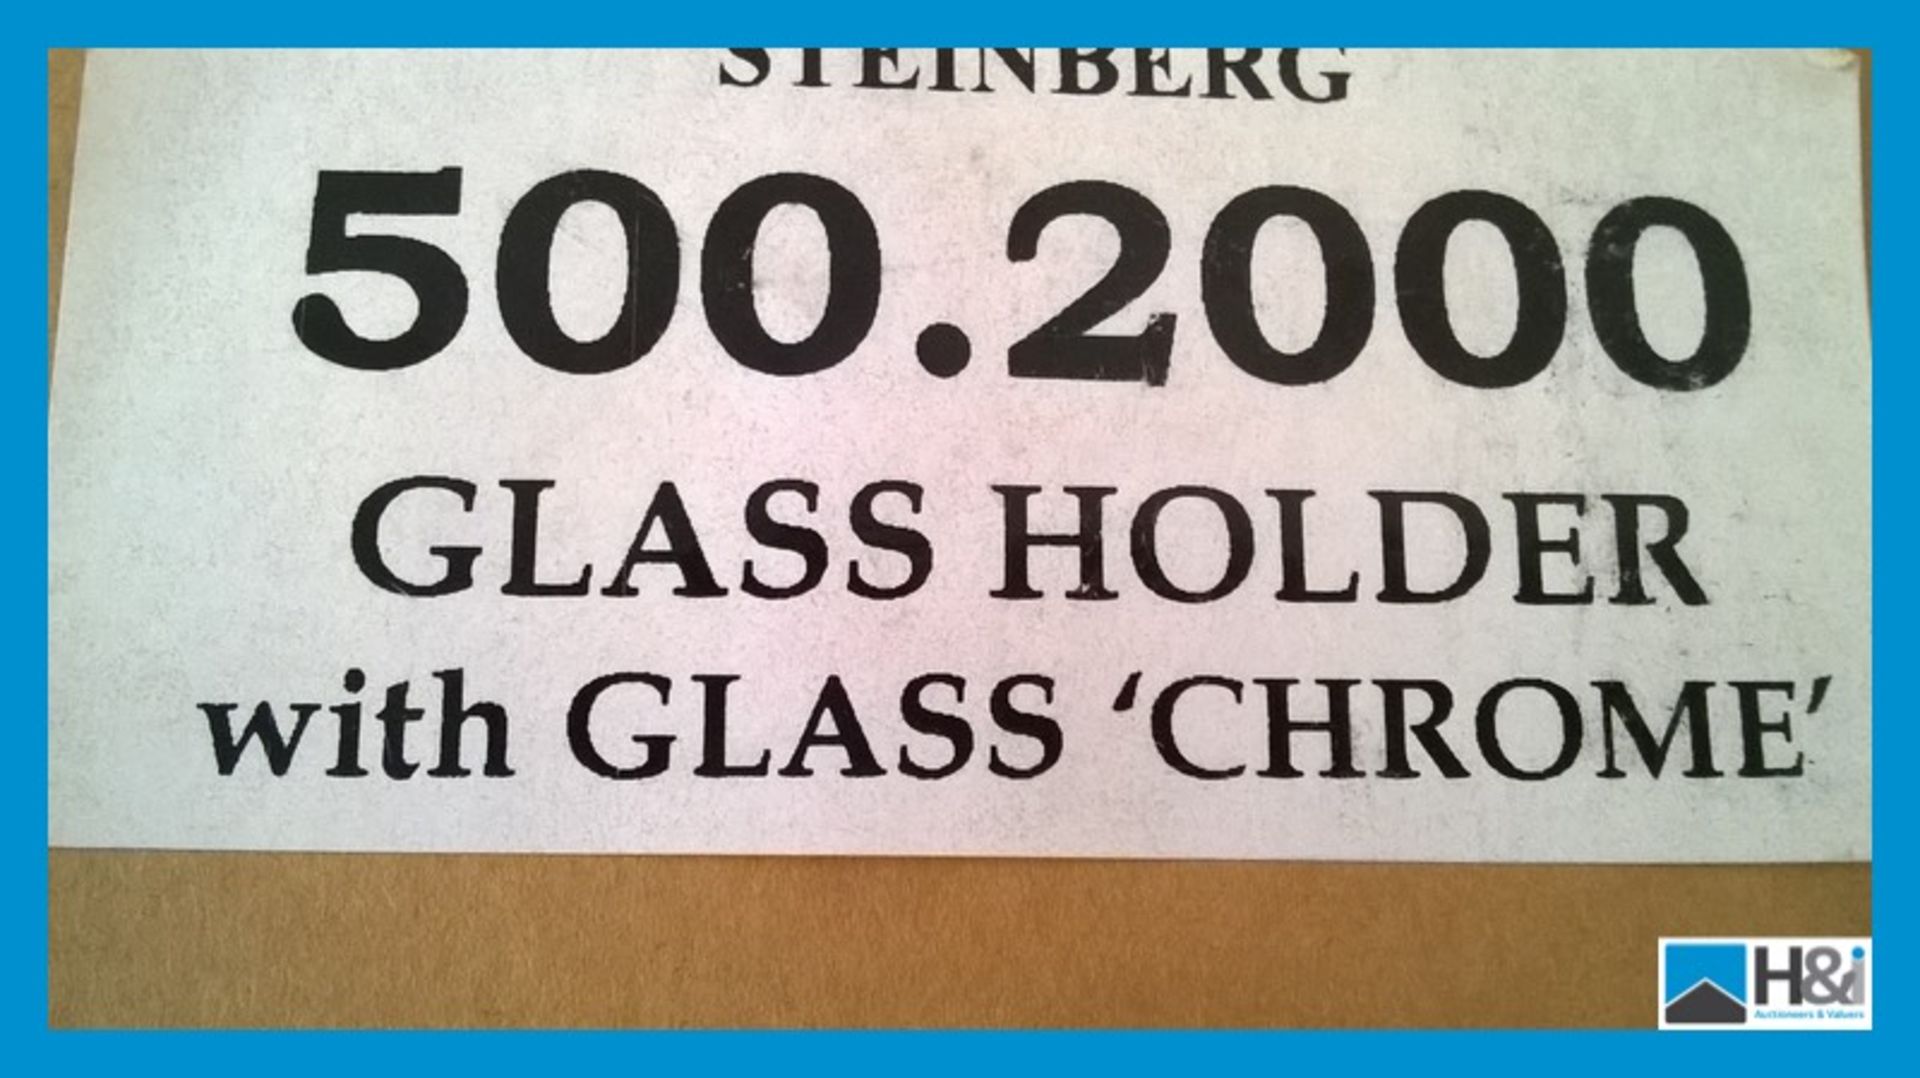 Steinberg Clear Glass Tumbler & Polished Chrome Holder, 500.2000. RRP £83.50 Brand New in Box. - Image 3 of 3